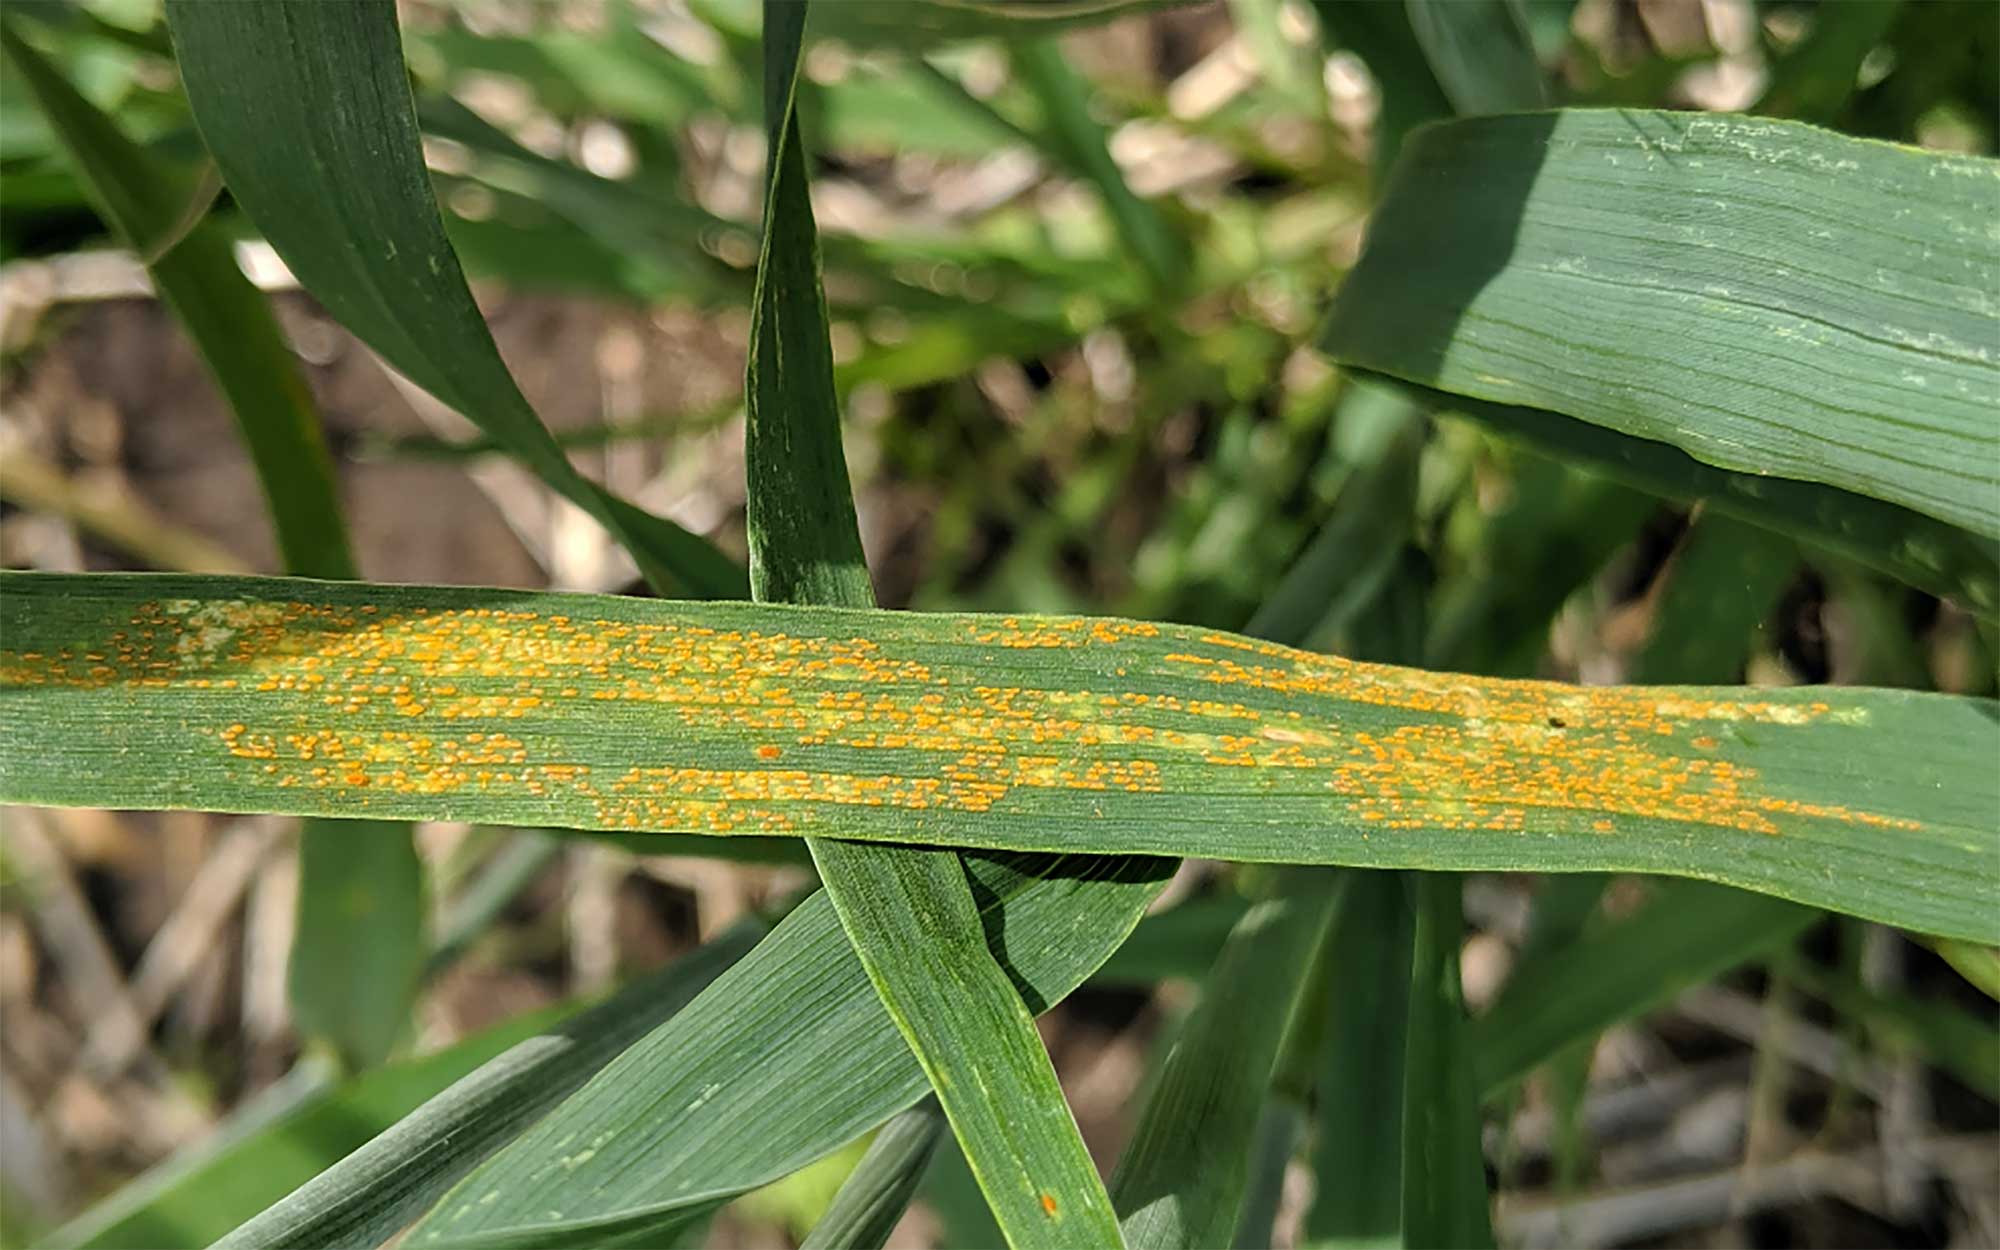 Green winter wheat leaf with yellow-orange strips indicative of stripe rust.